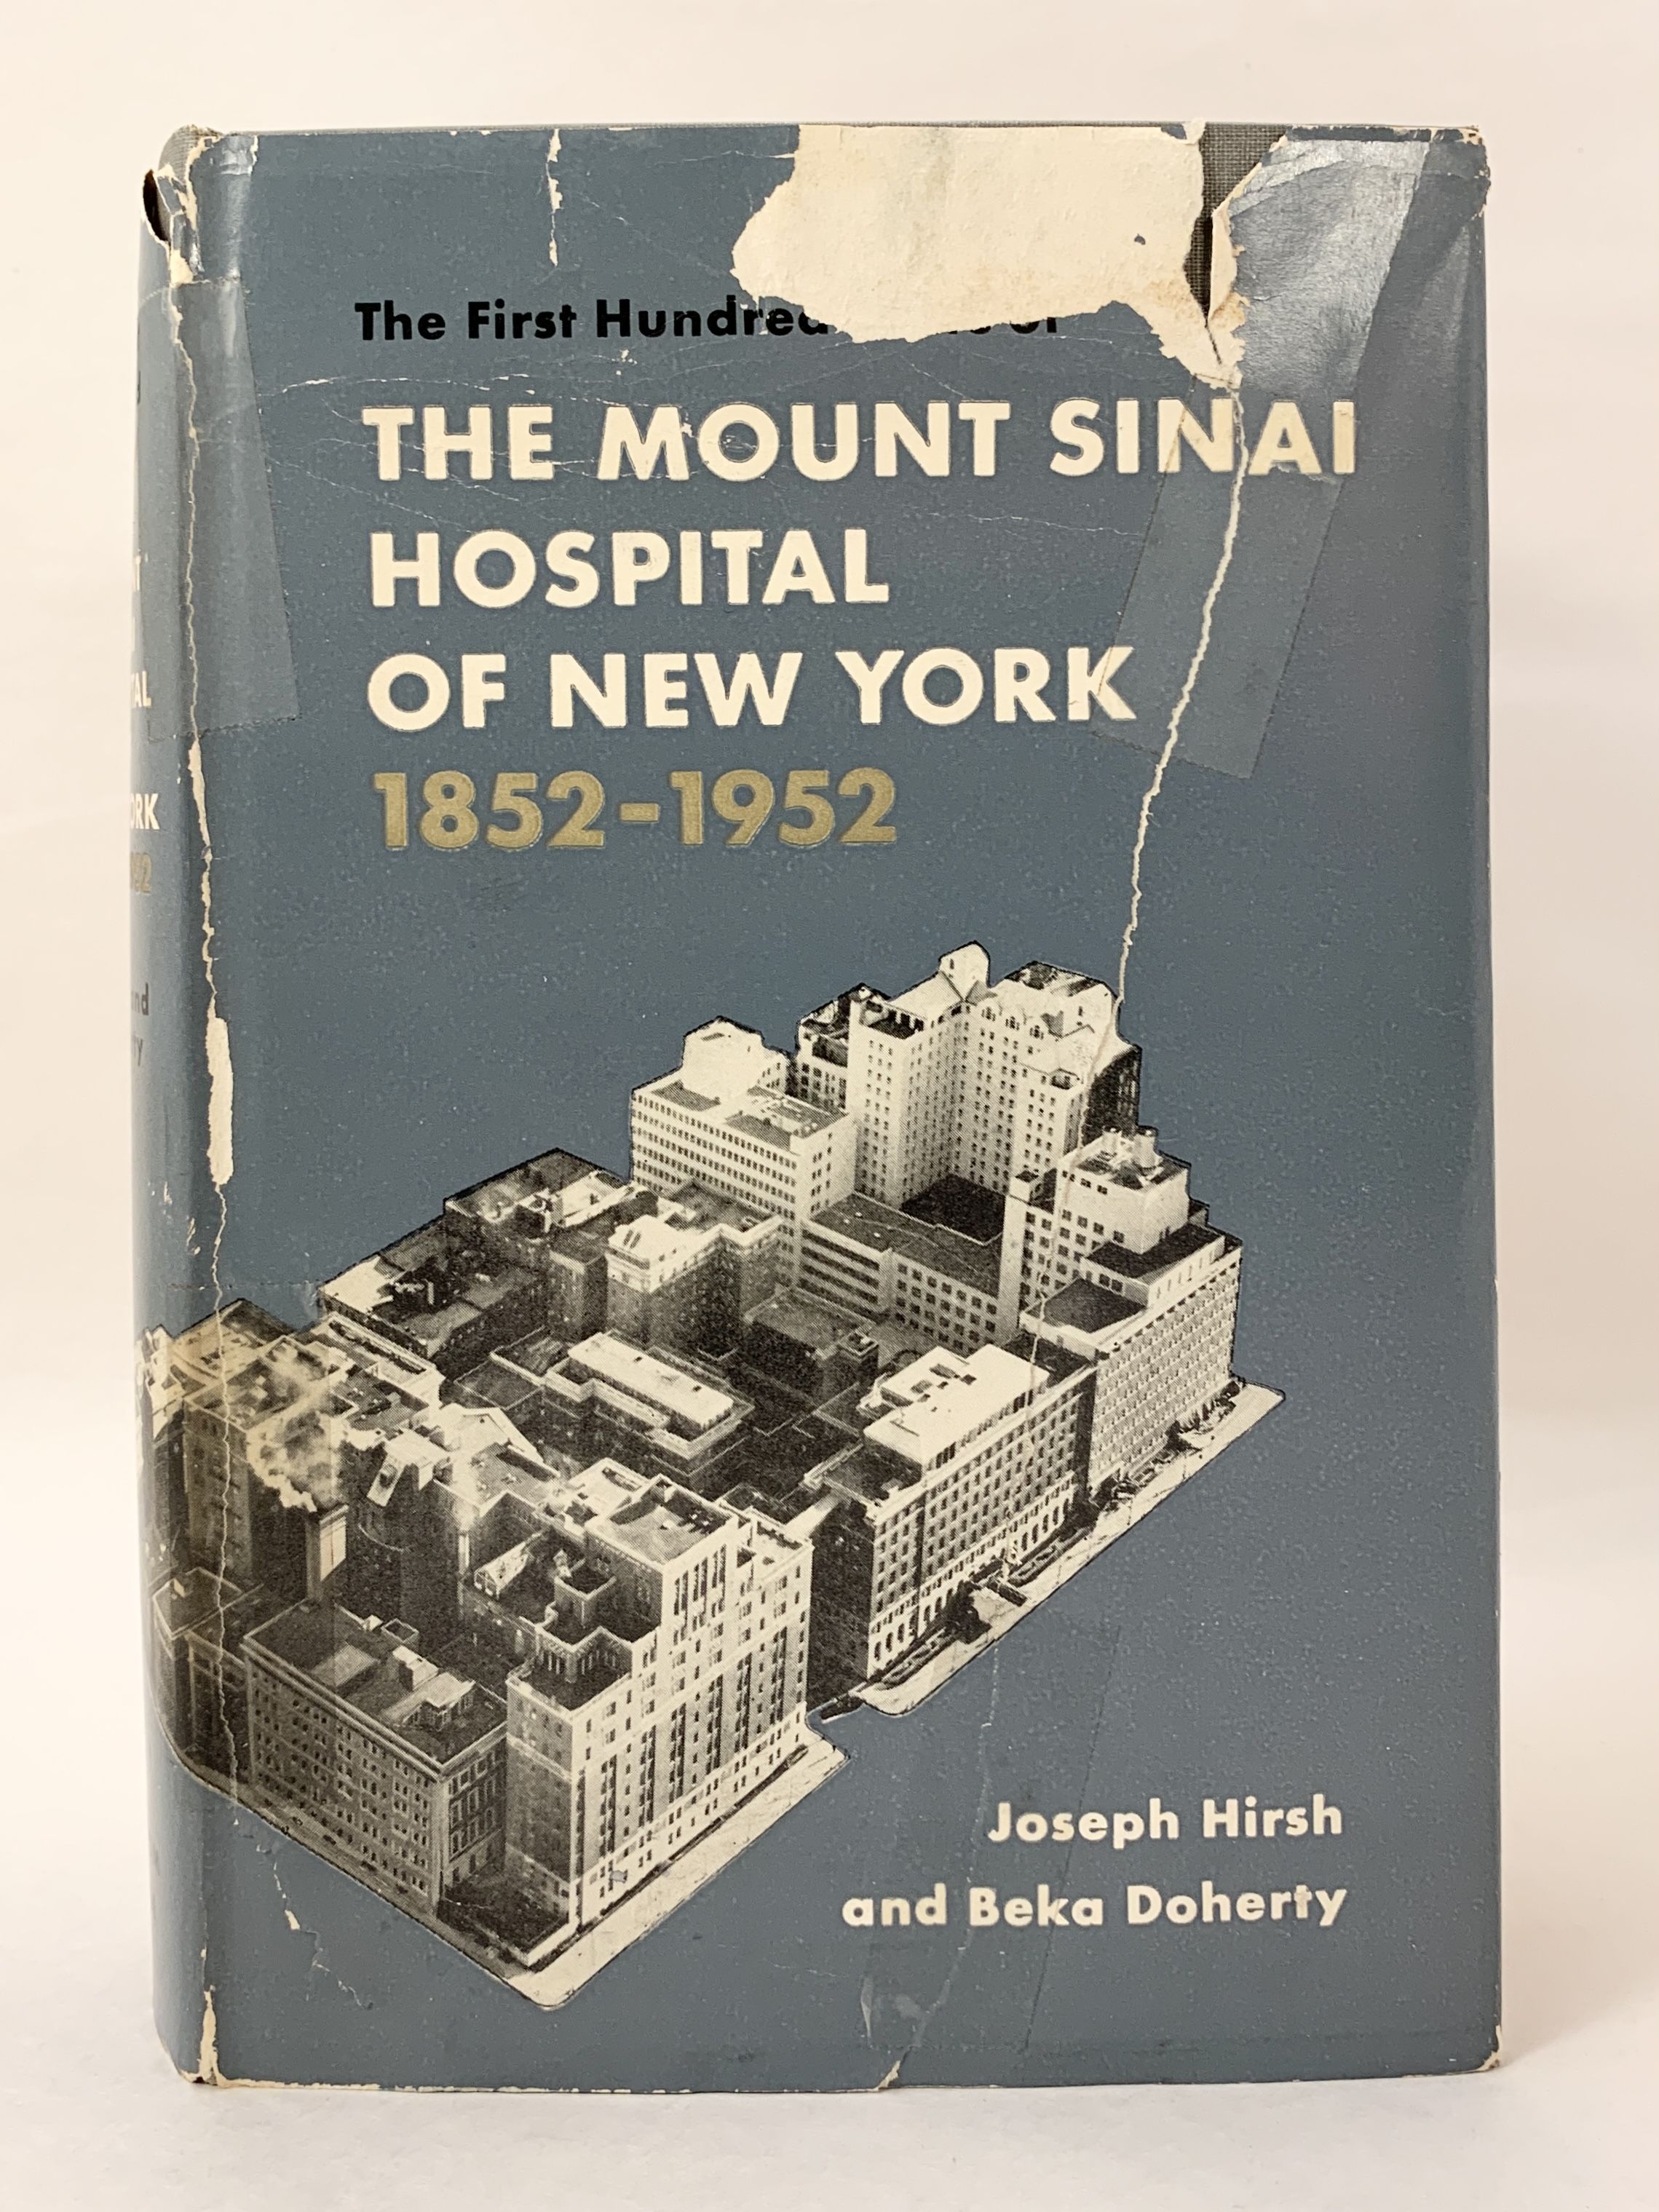 The First Hundred Years of the Mount Sinai Hospital of New York 1852